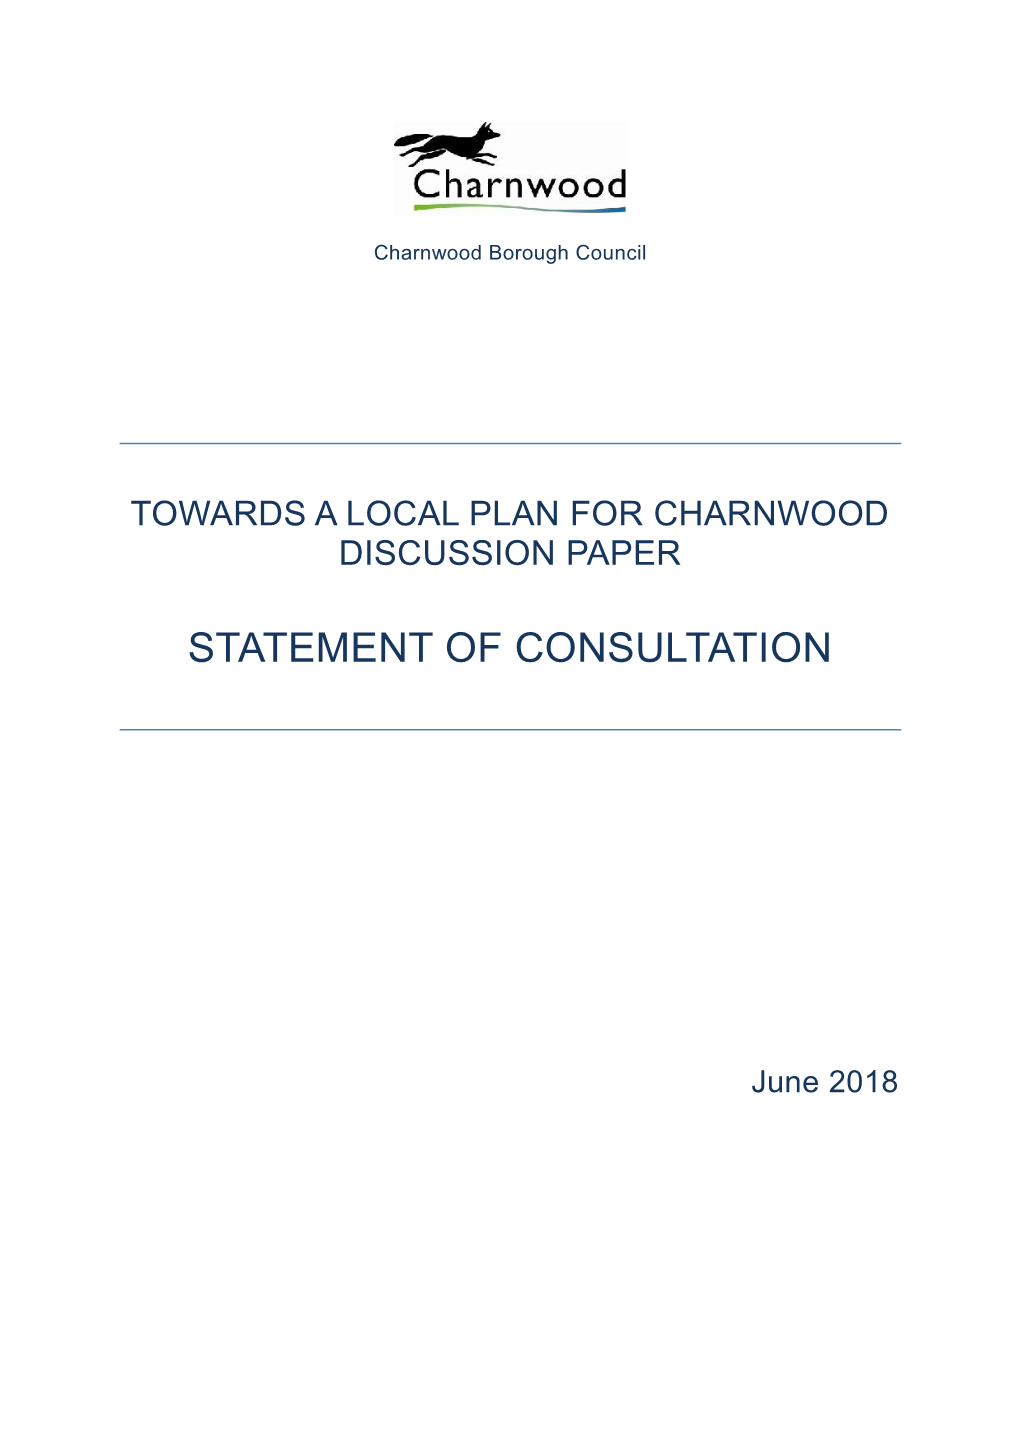 Towards a Local Plan for Charnwood Statement of Consultation